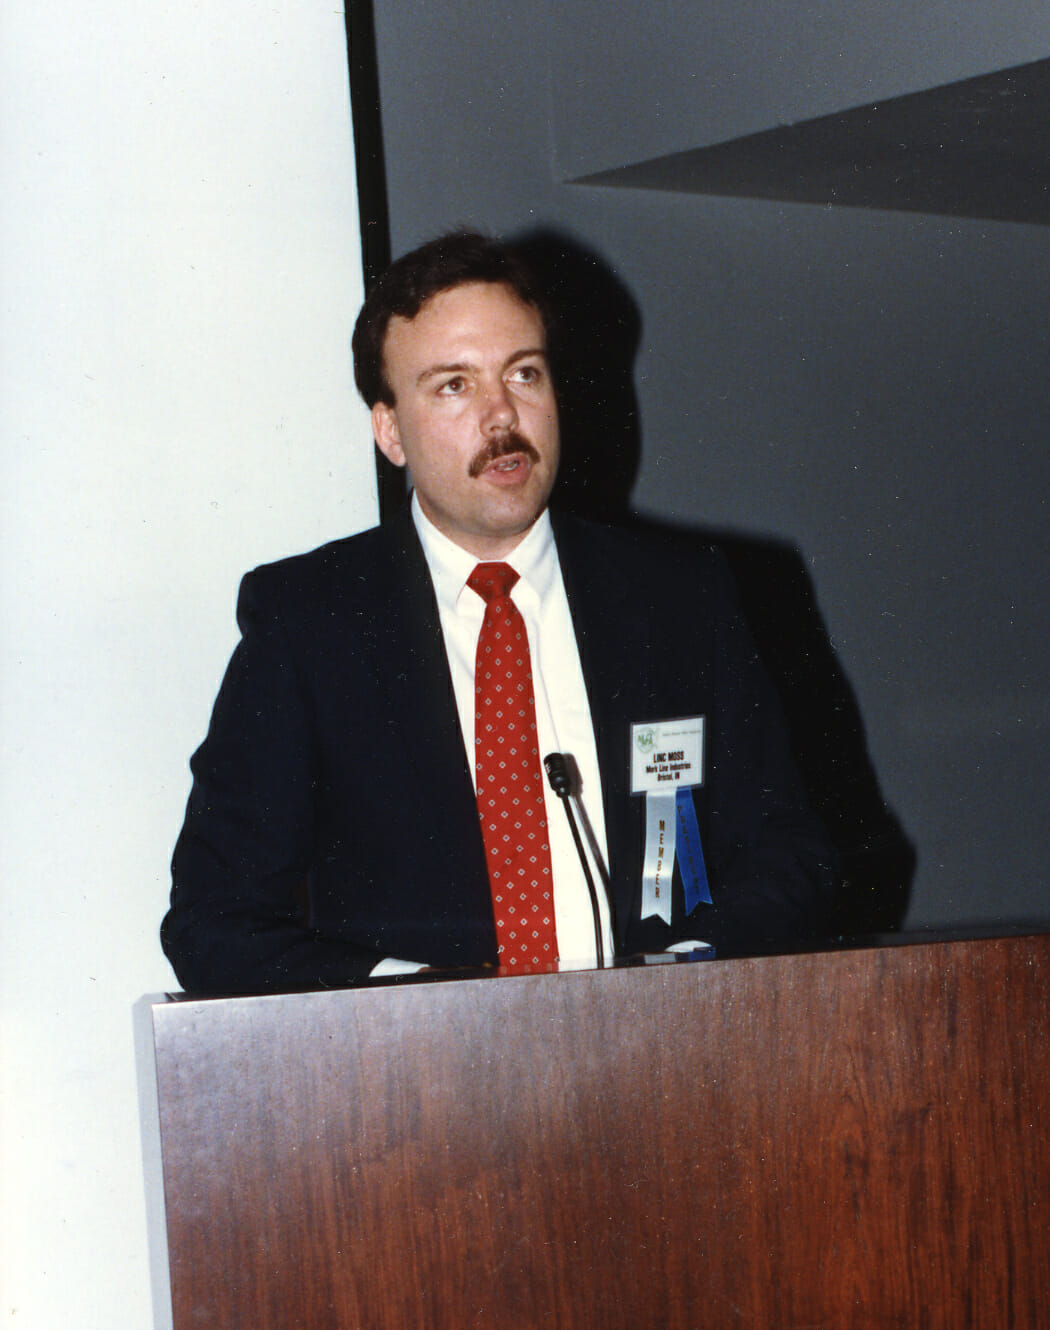 Linc Moss addresses attendees at the 1987 MMOA annual convention and tradeshow.